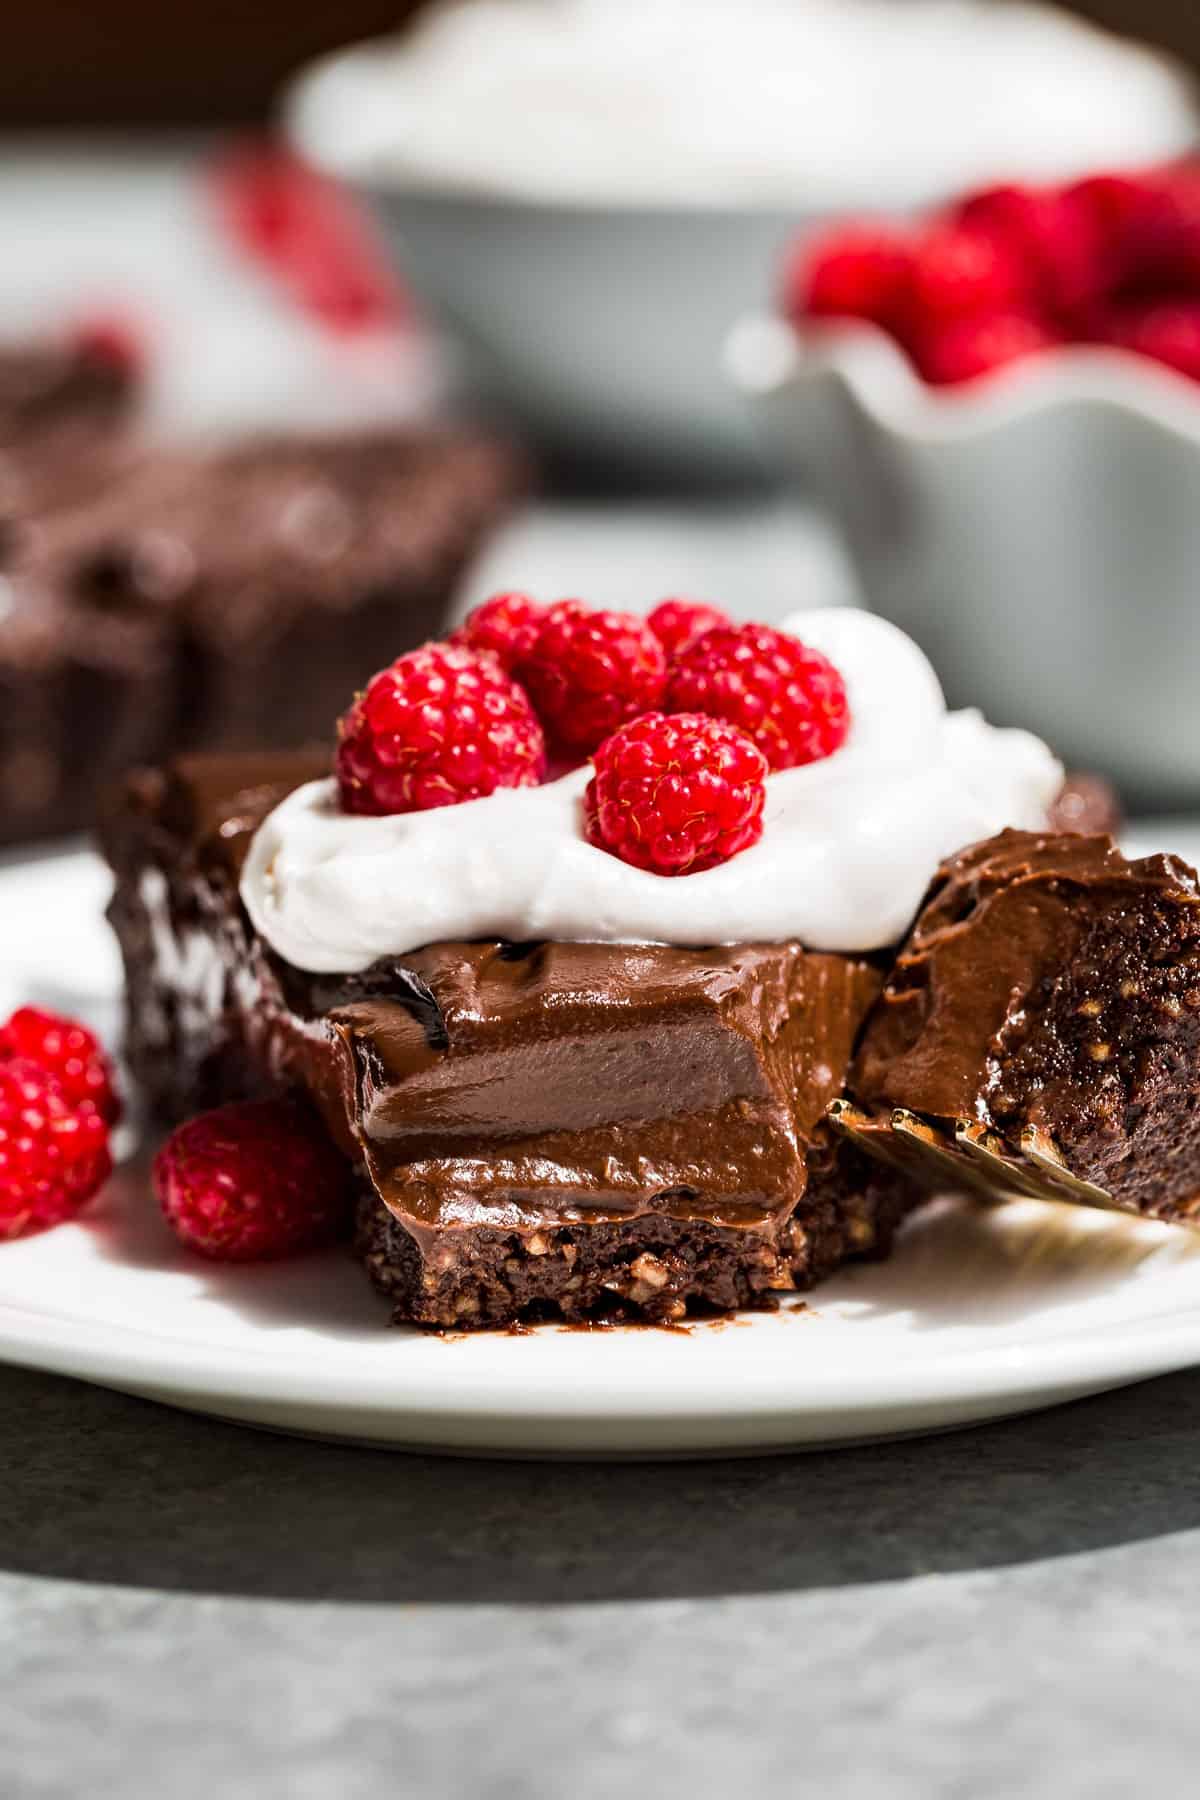 A slice of Healthy Chocolate Tart on a white plate topped with whipped cream and raspberries.